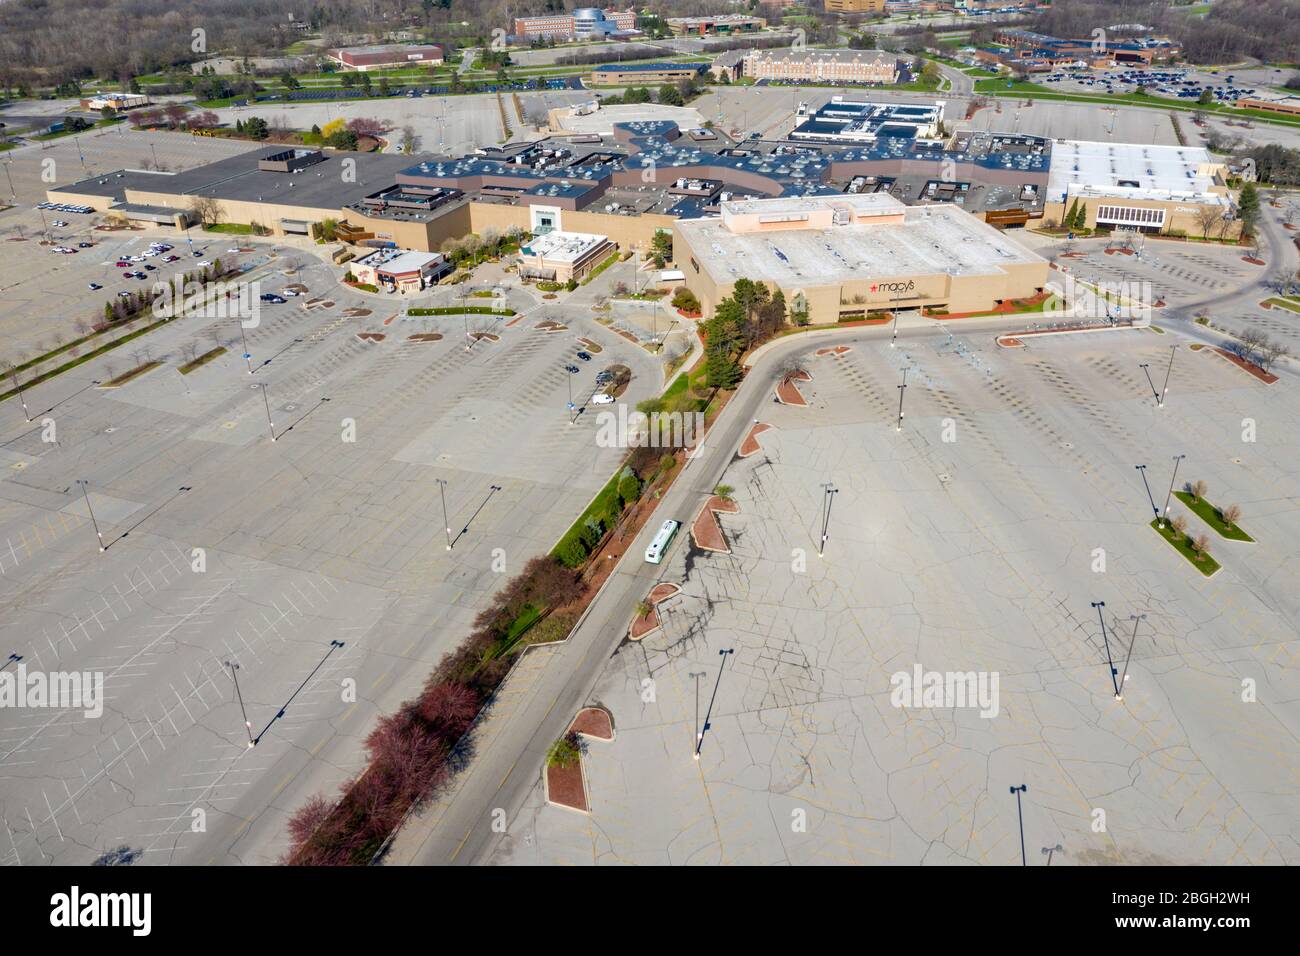 Dearborn, Michigan, USA. 20th Apr, 2020. The Fairlane Town Center, a major regional shopping mall in the Detroit suburbs, is closed due to the coronavirus pandemic. The parking lot is empty. Credit: Jim West/Alamy Live News Stock Photo